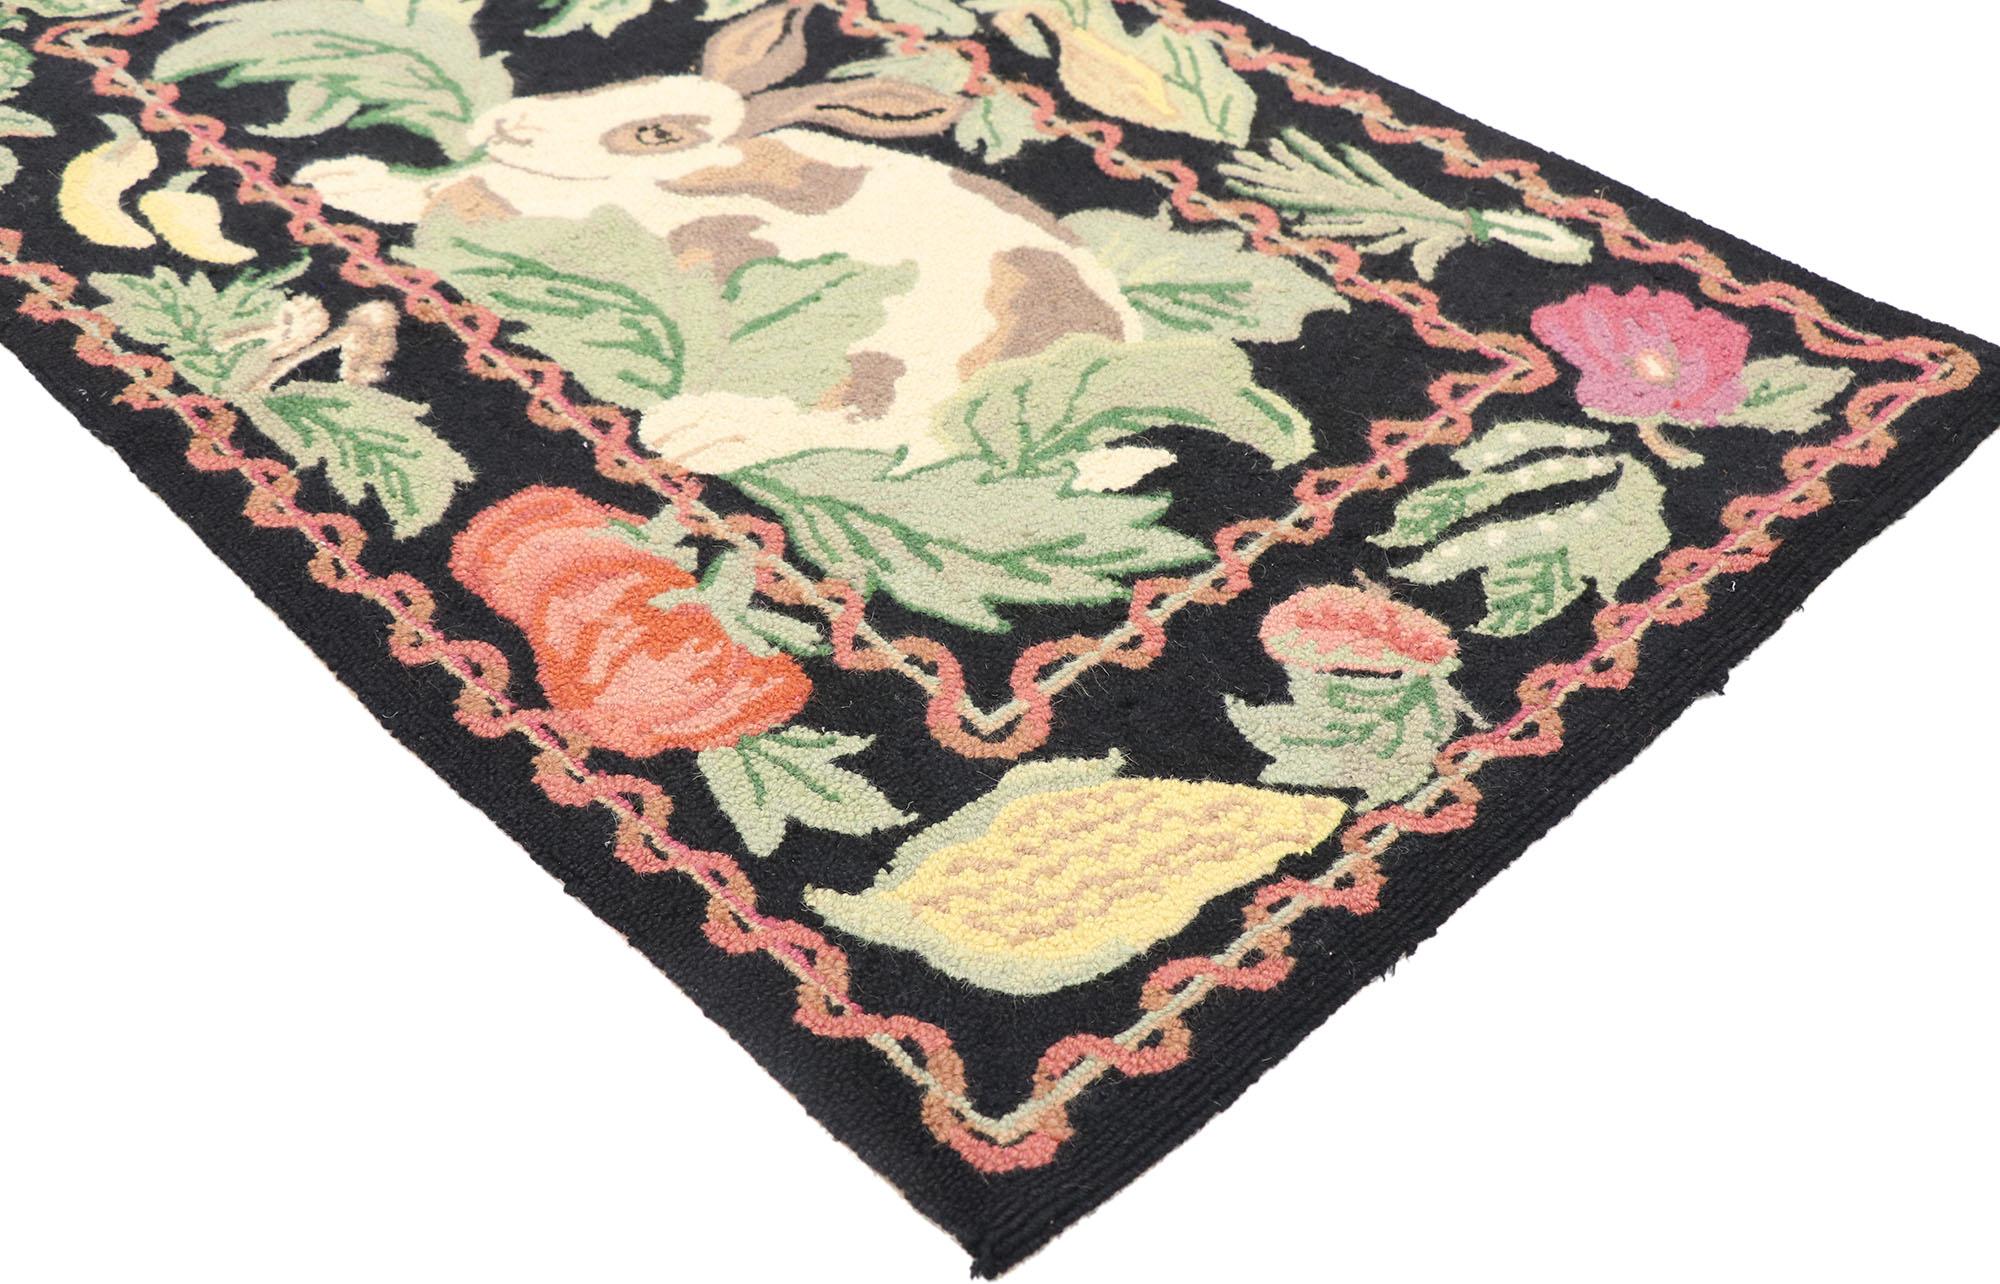 77854 vintage Garden Rabbit Hooked rug with French Country Cottage style 02'05 x 04'00. Warm and welcoming, this vintage garden rabbit hooked rug showcases a French Country Cottage style. The abrashed black field features a rabbit surrounded by a